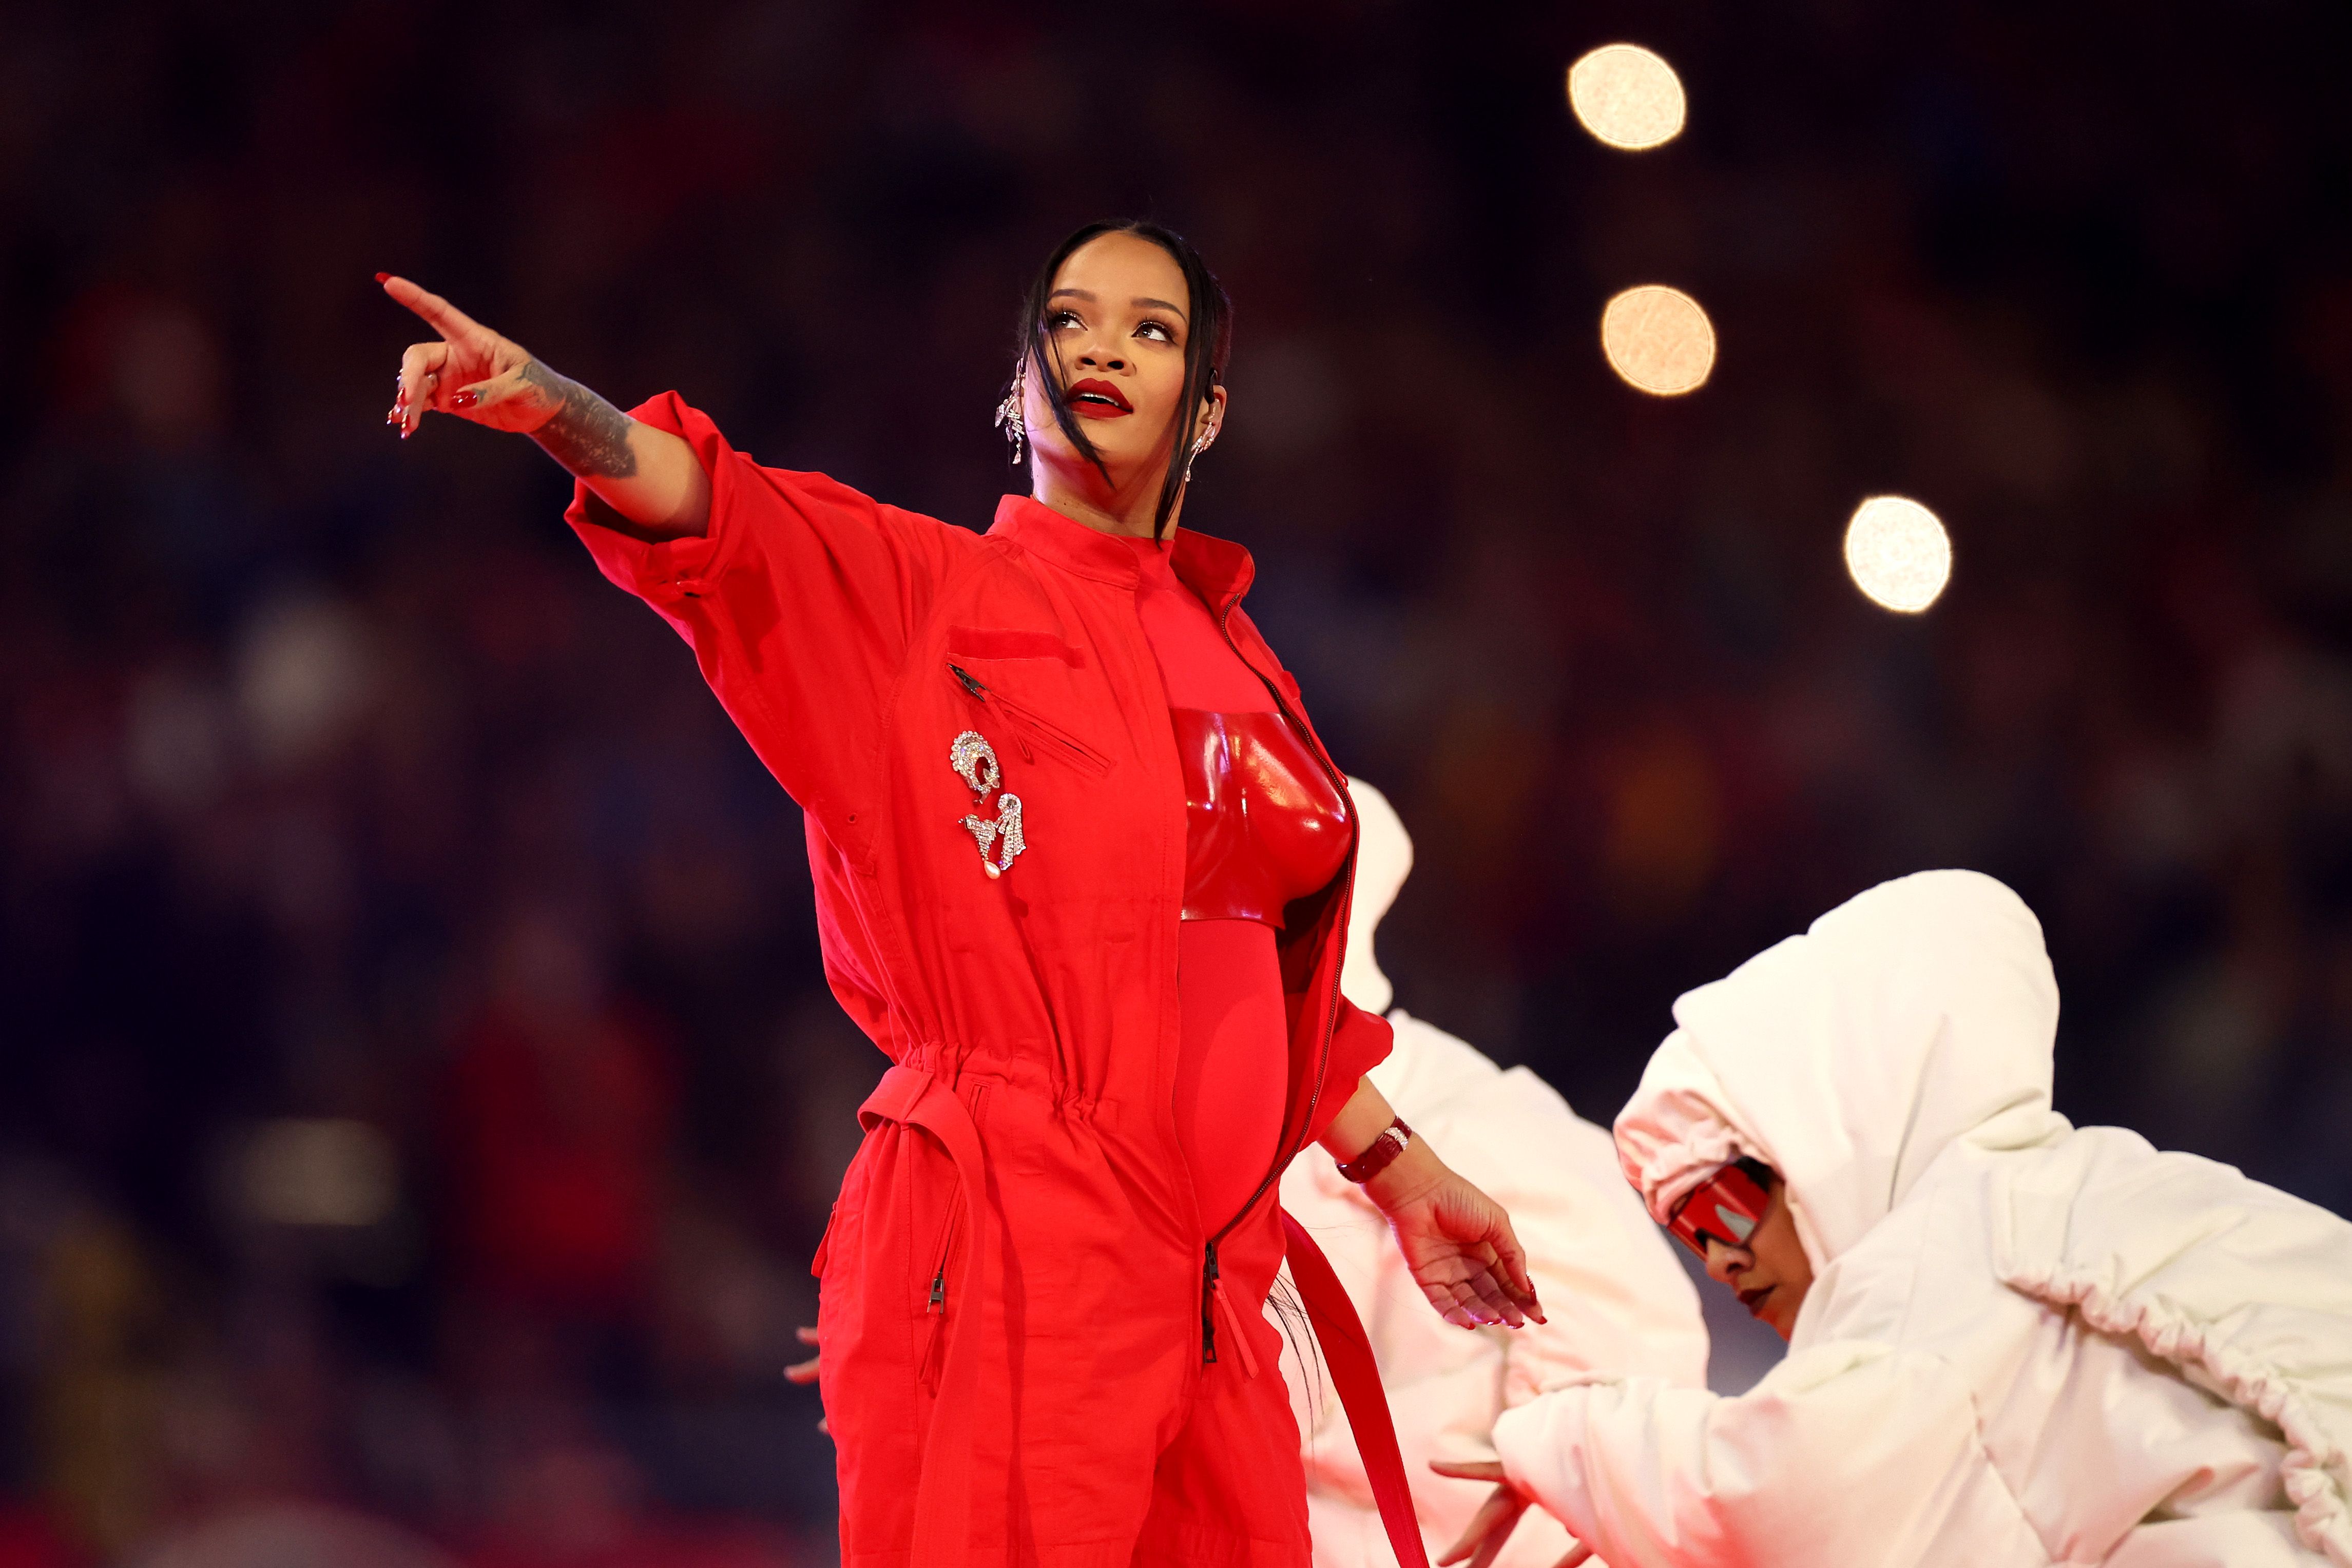 How to Watch and Stream Rihanna's 2023 Super Bowl Halftime Show